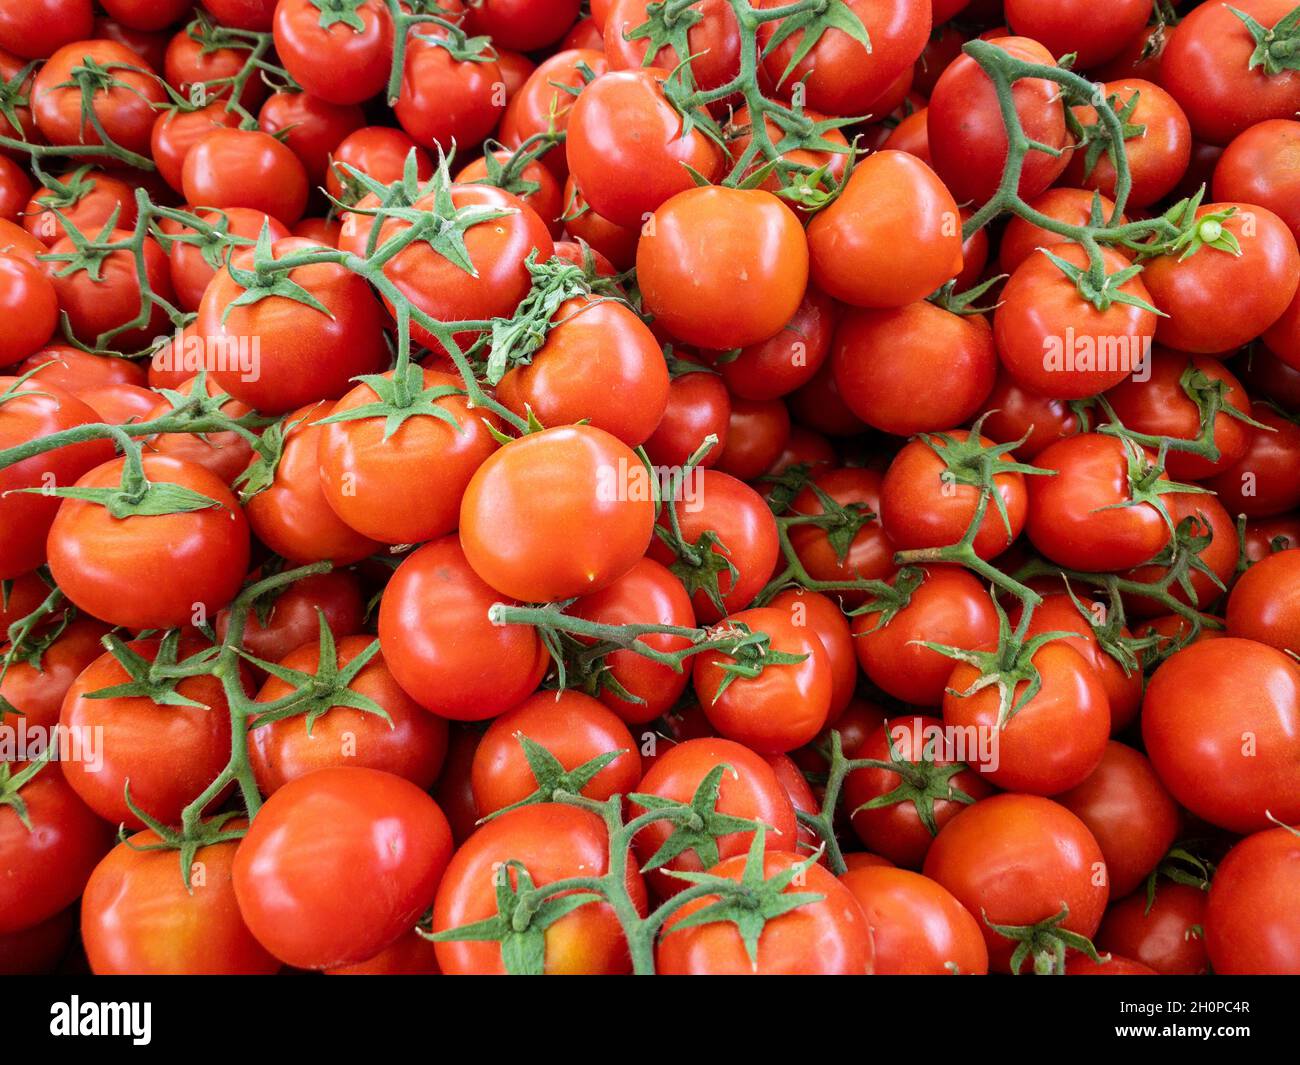 Choosing very delicious vegetable tomato from a pile in a grocery Stock Photo